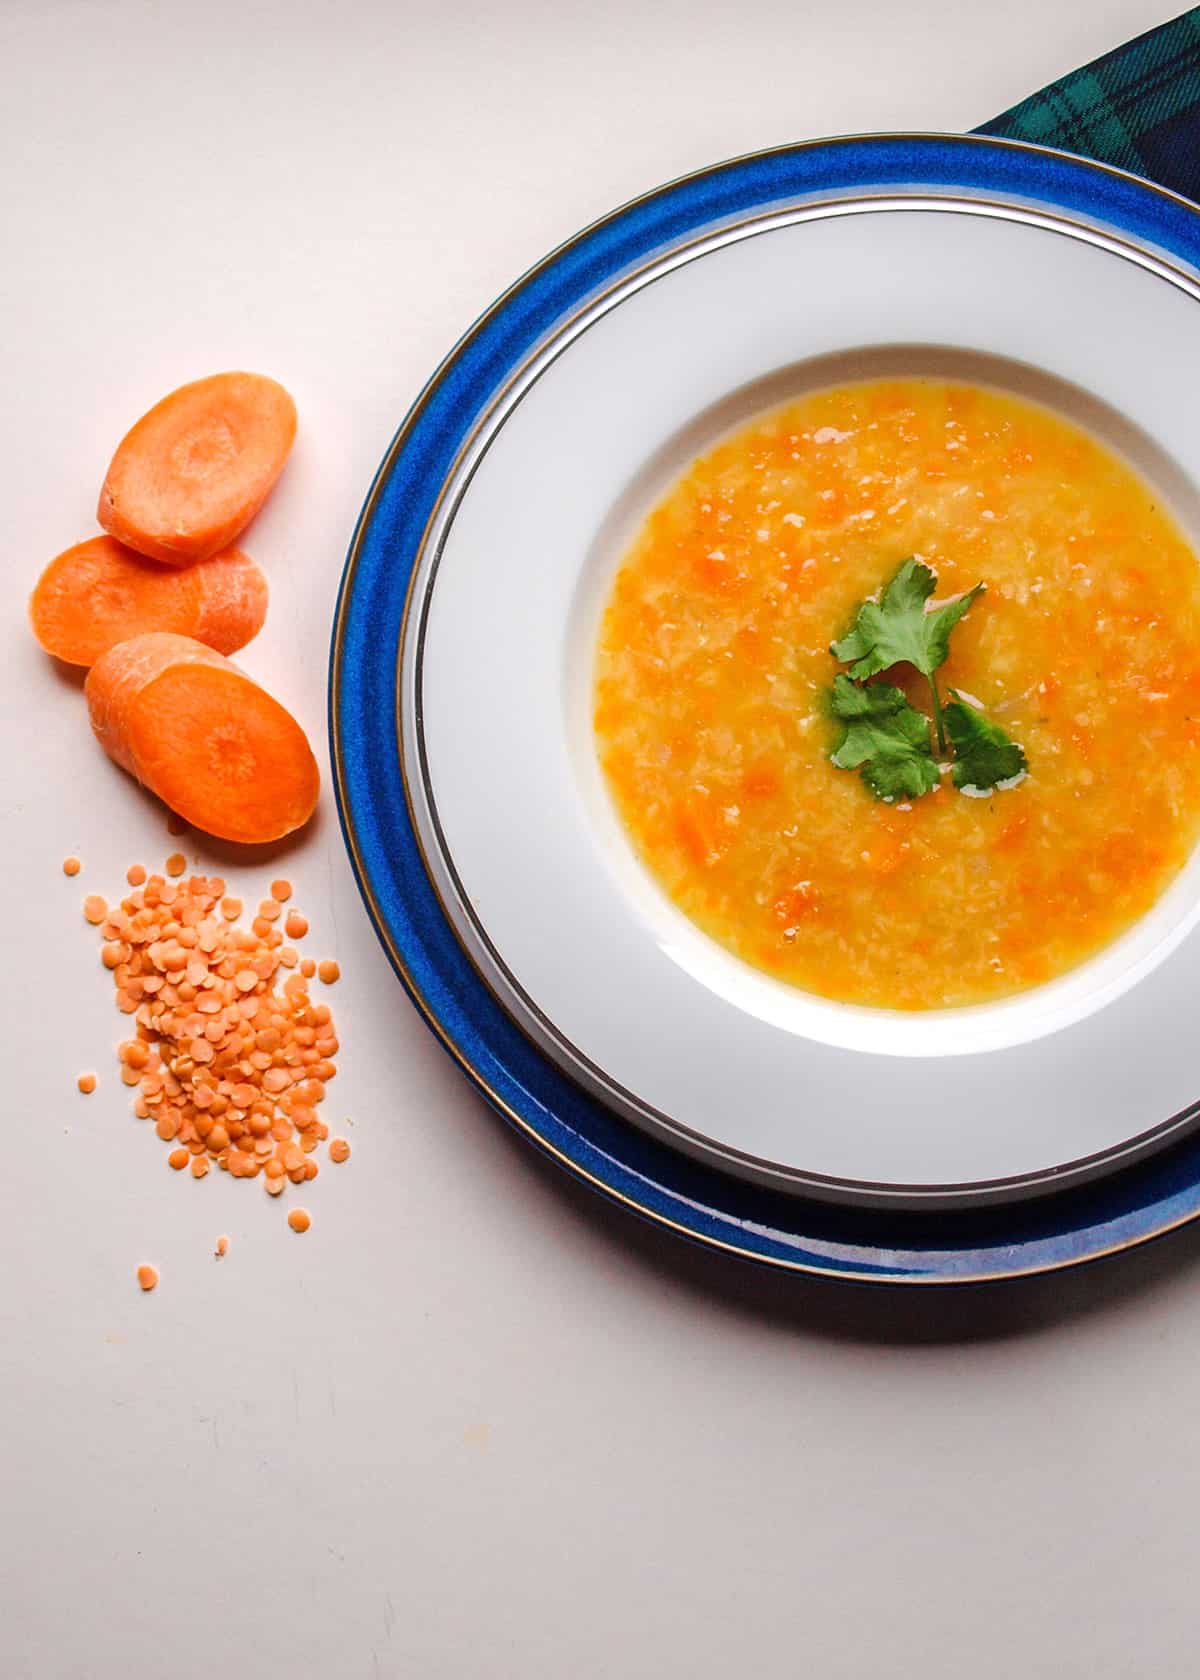 Easy Scottish Red Lentil soup with carrots and lentils